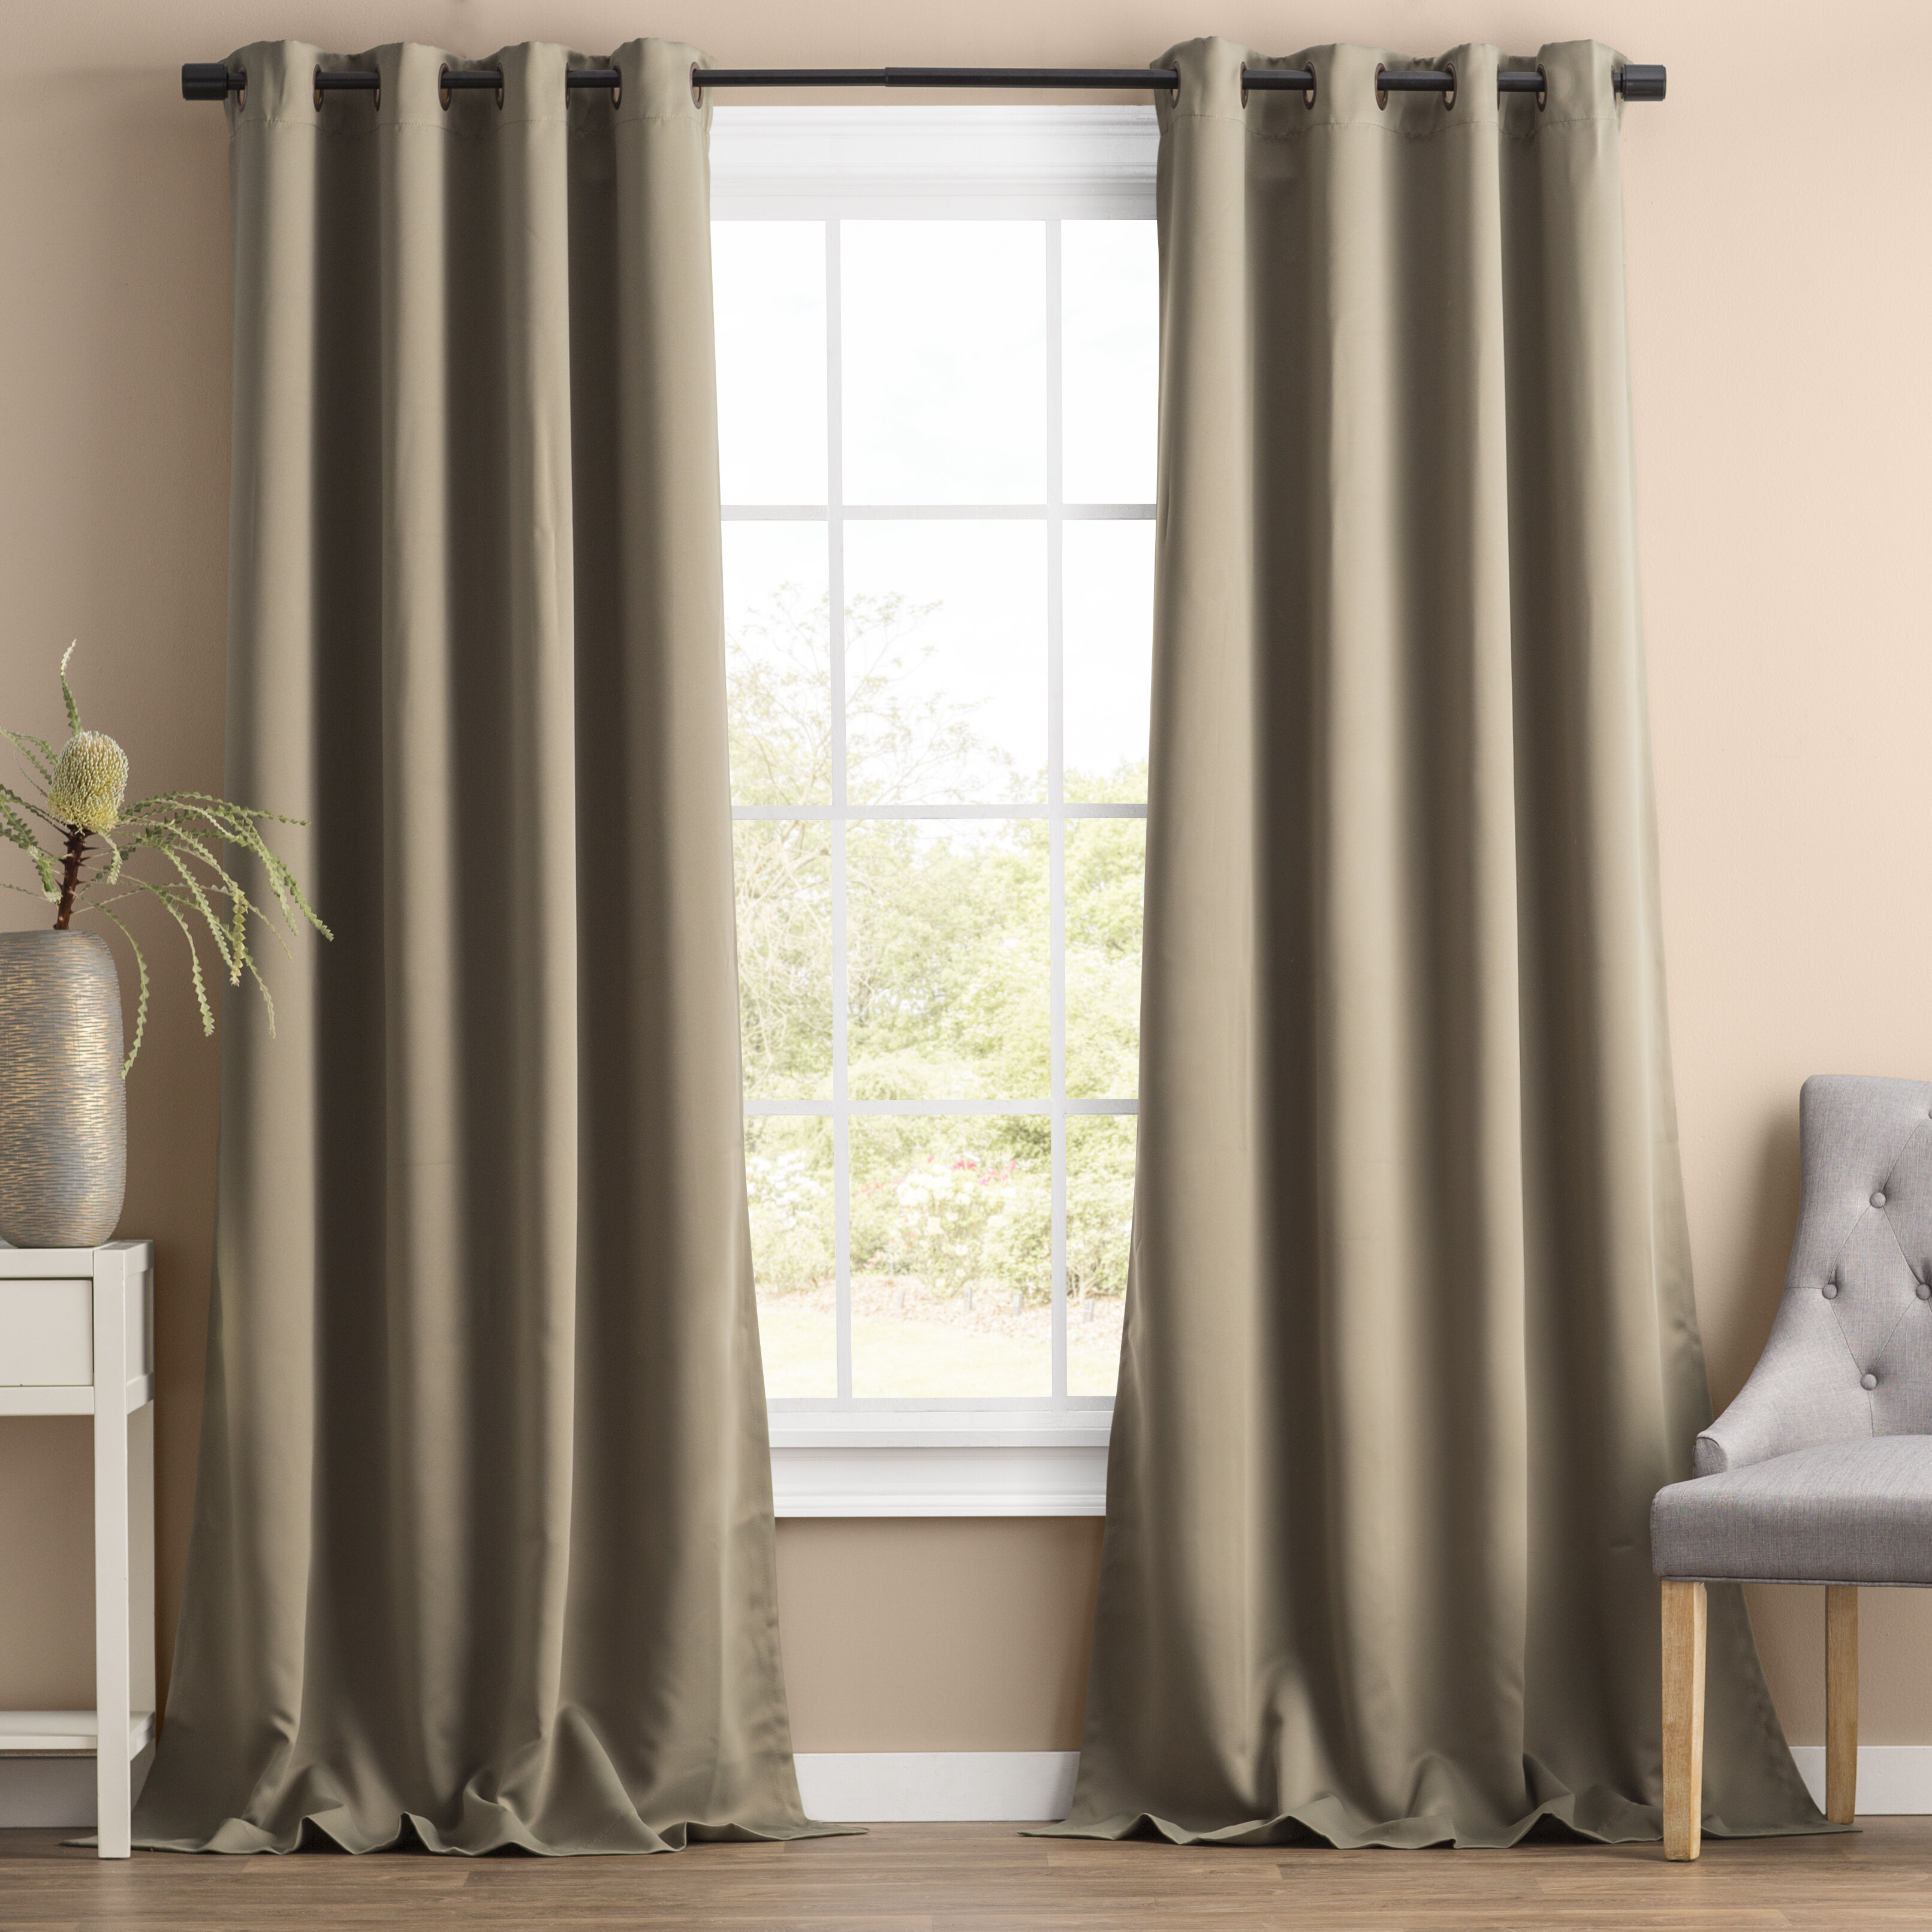 Ochre Lined Curtains Wool Feel Tape Top Ready Made Pencil Pleat Curtain Pairs 